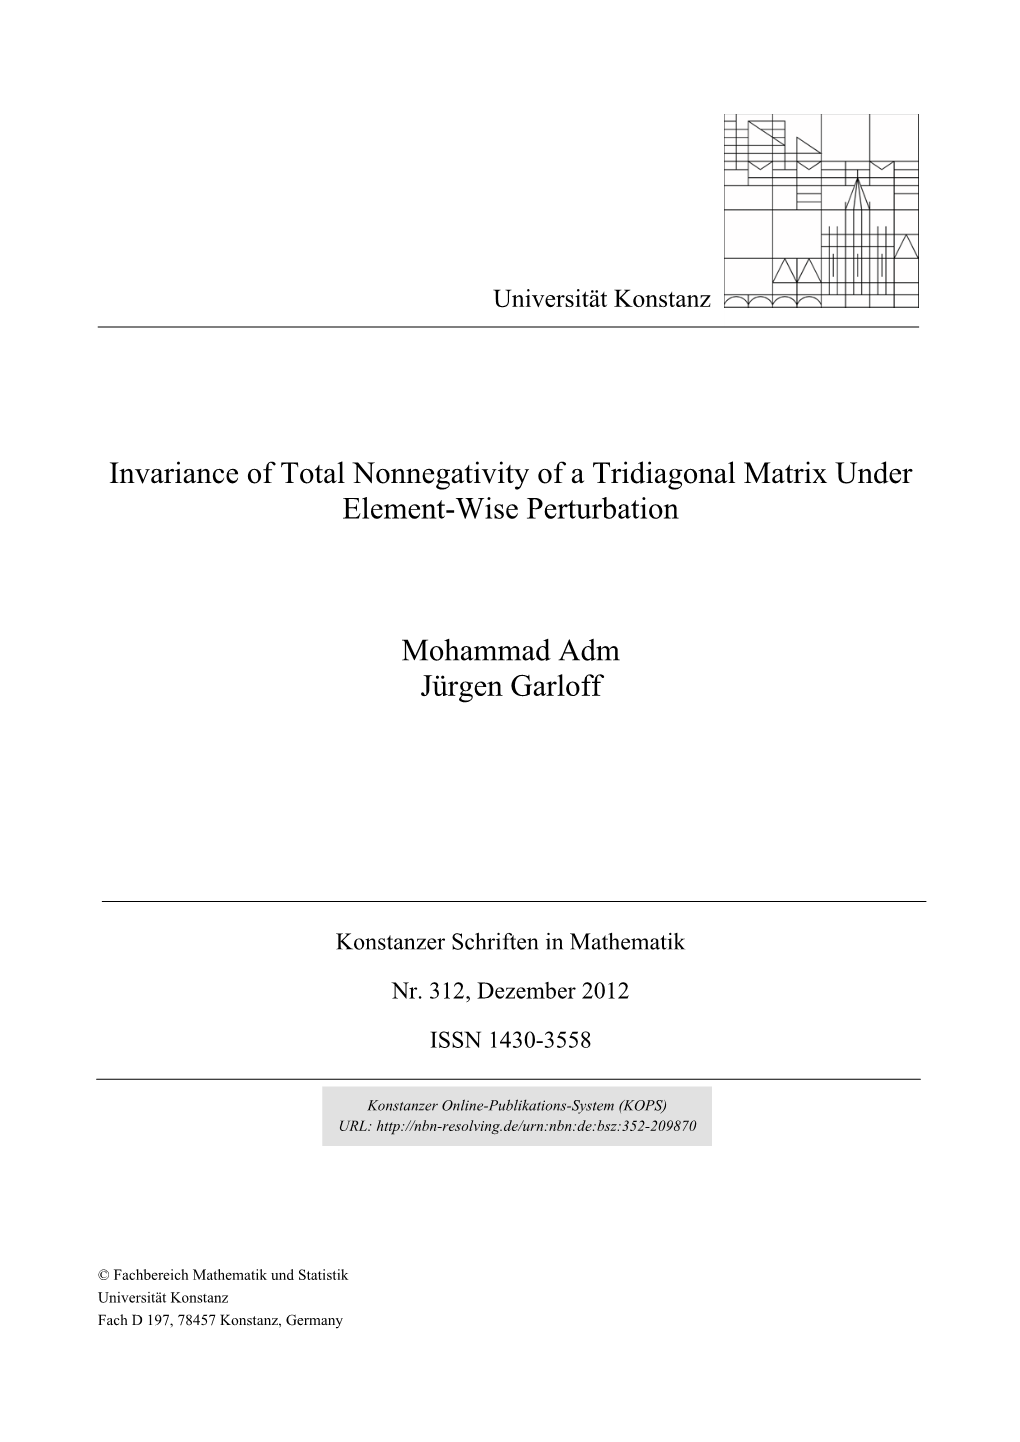 Invariance of Total Nonnegativity of a Tridiagonal Matrix Under Element-Wise Perturbation